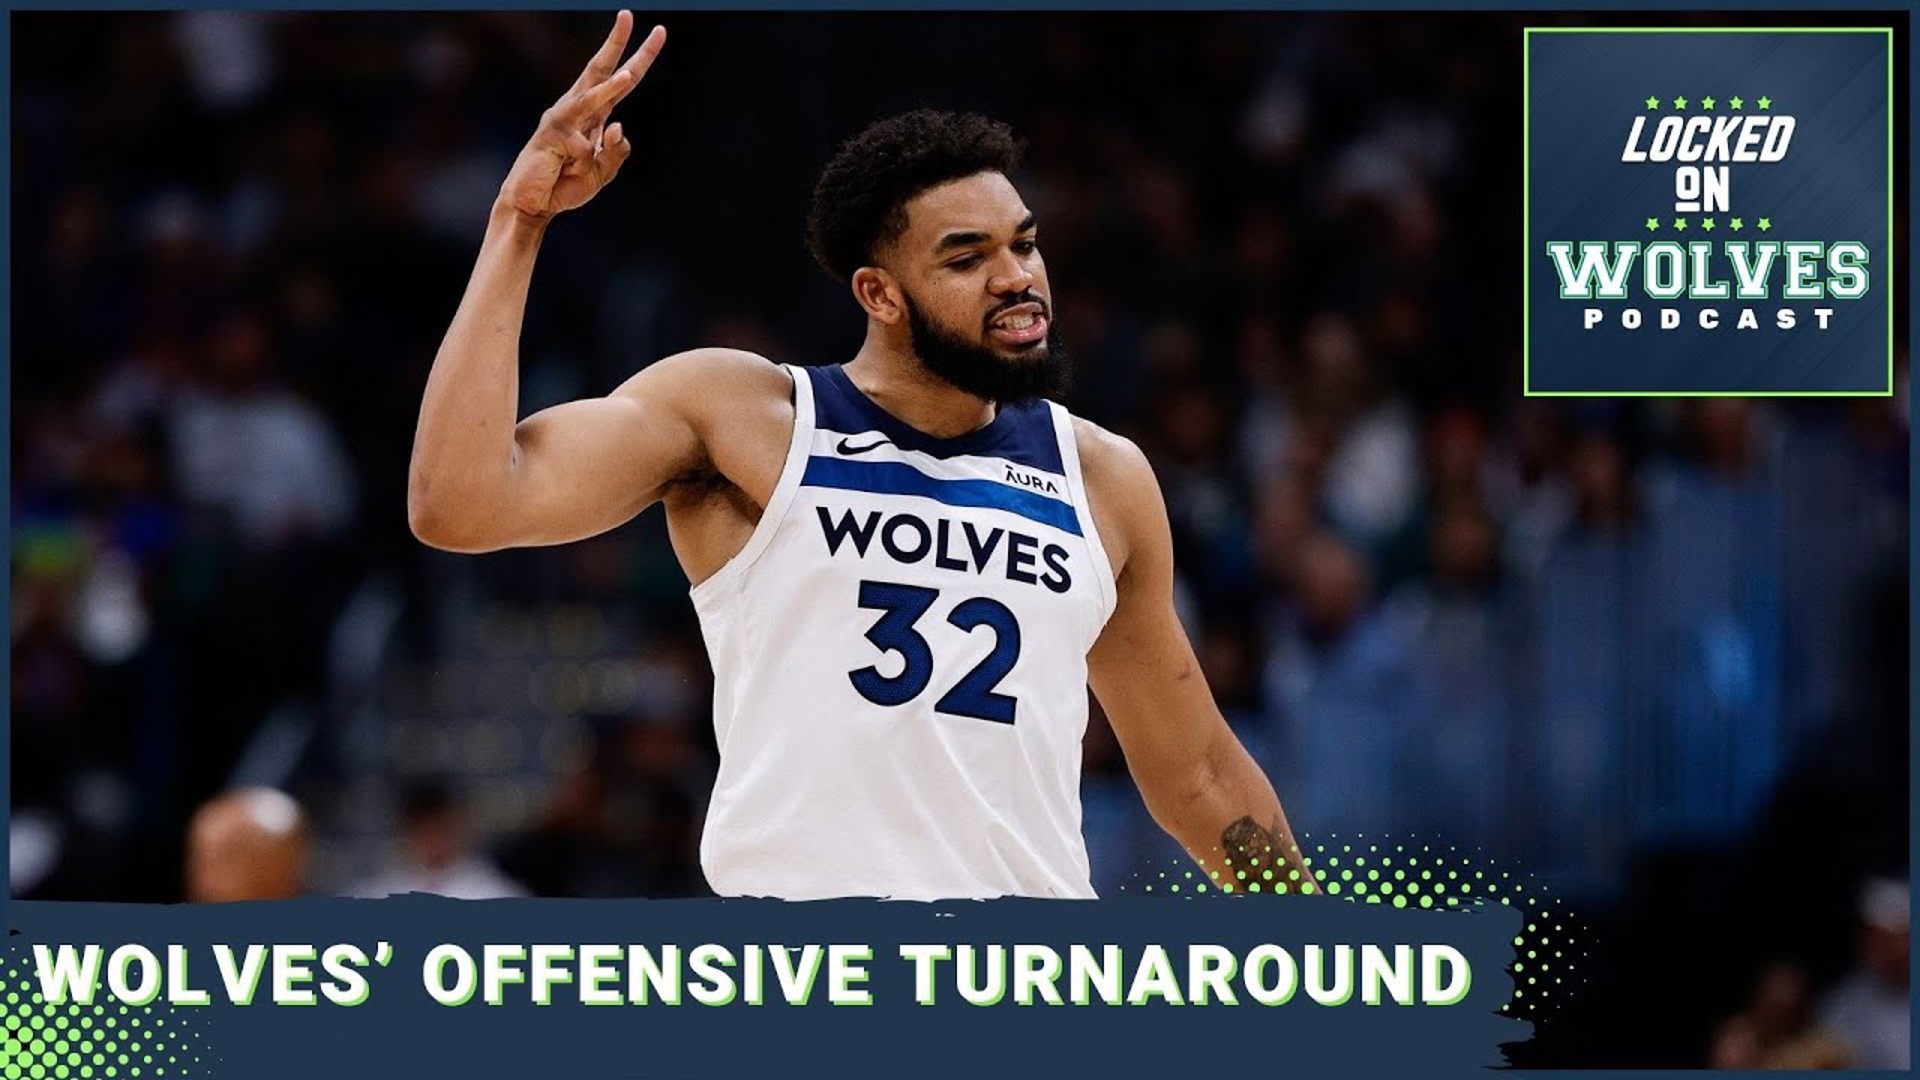 Comparing the Minnesota Timberwolves' playoff offense to the regular season + Wolves depth advantage